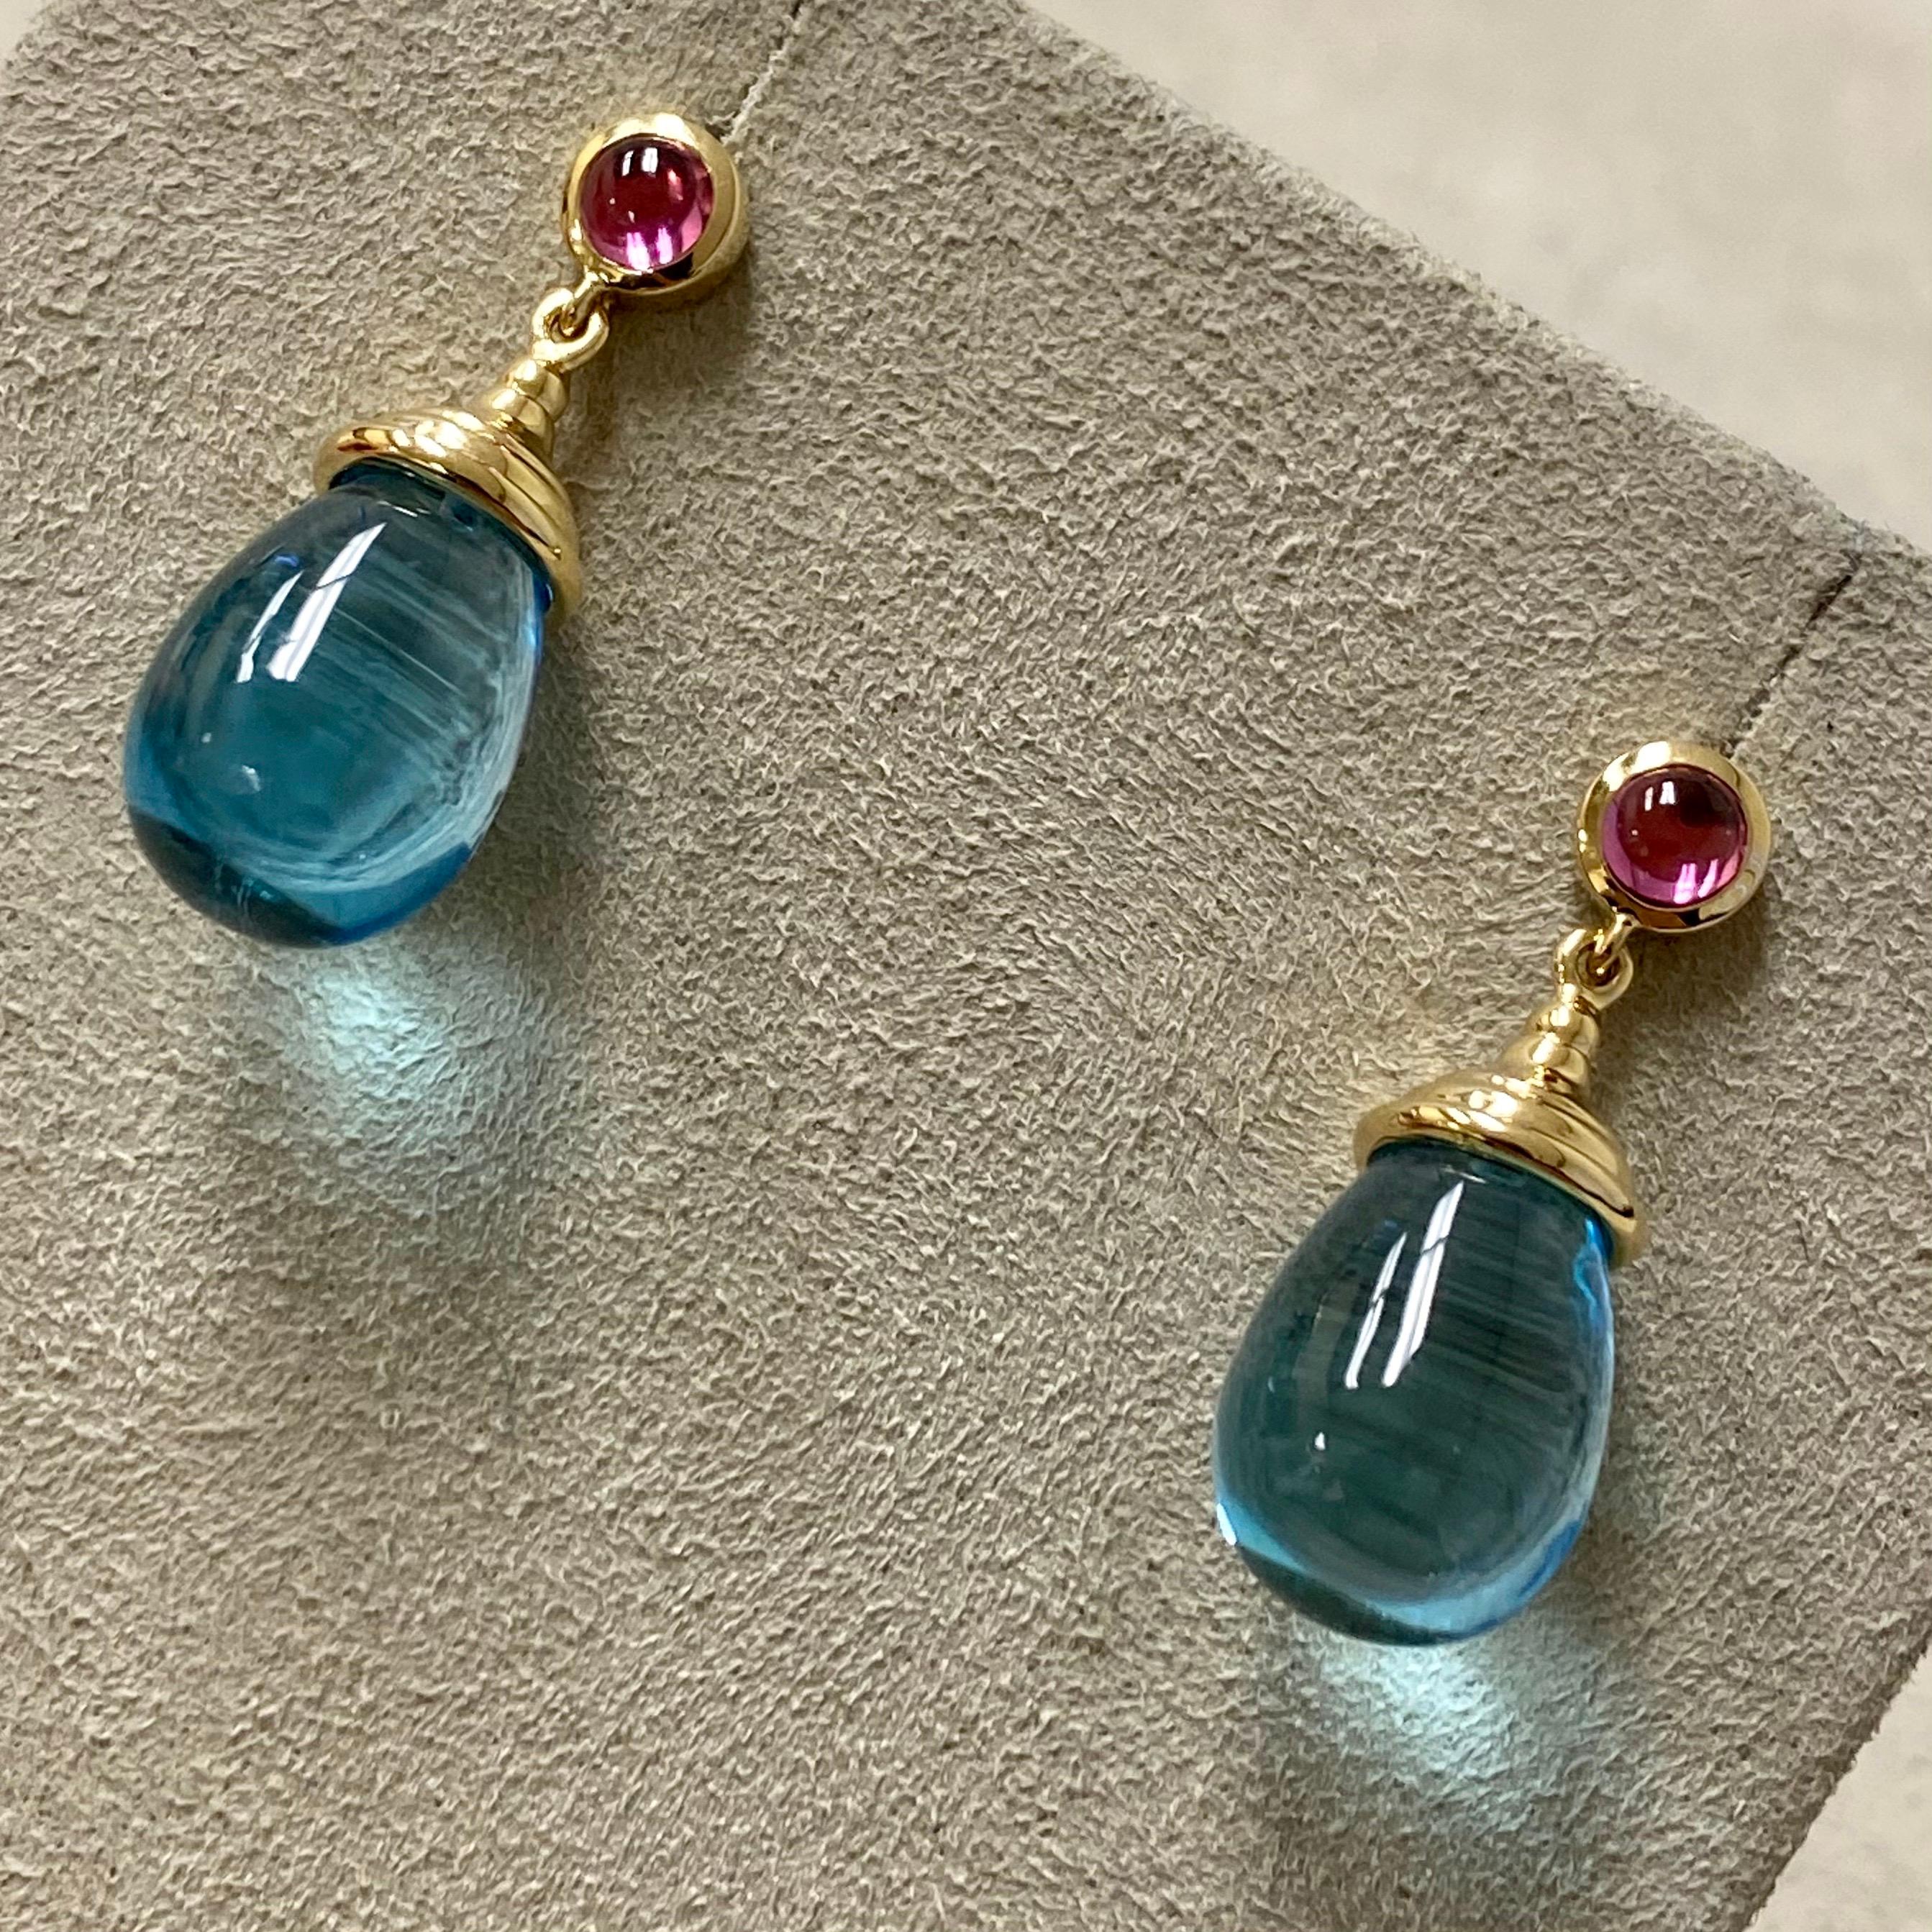 Created in 18 karat yellow gold
Blue Topaz Drops 25 carats approx.
Rubellite cabochons 0.50 carat approx.
18kyg butterfly backs

About the Designers ~ Dharmesh & Namrata

Drawing inspiration from little things, Dharmesh & Namrata Kothari have